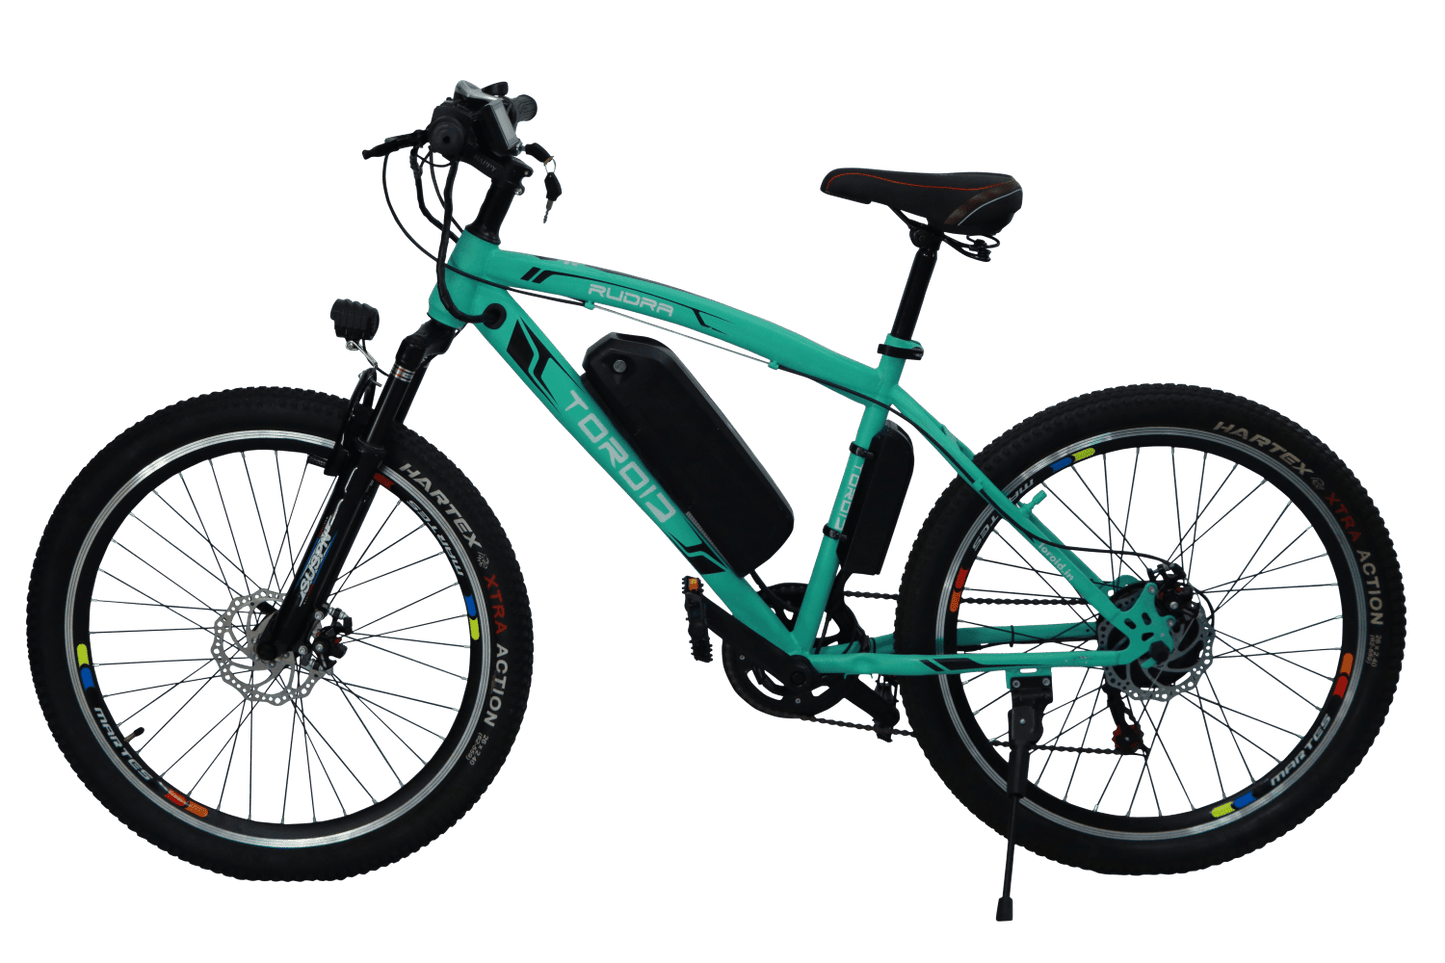 rudra Electric cycle on sale